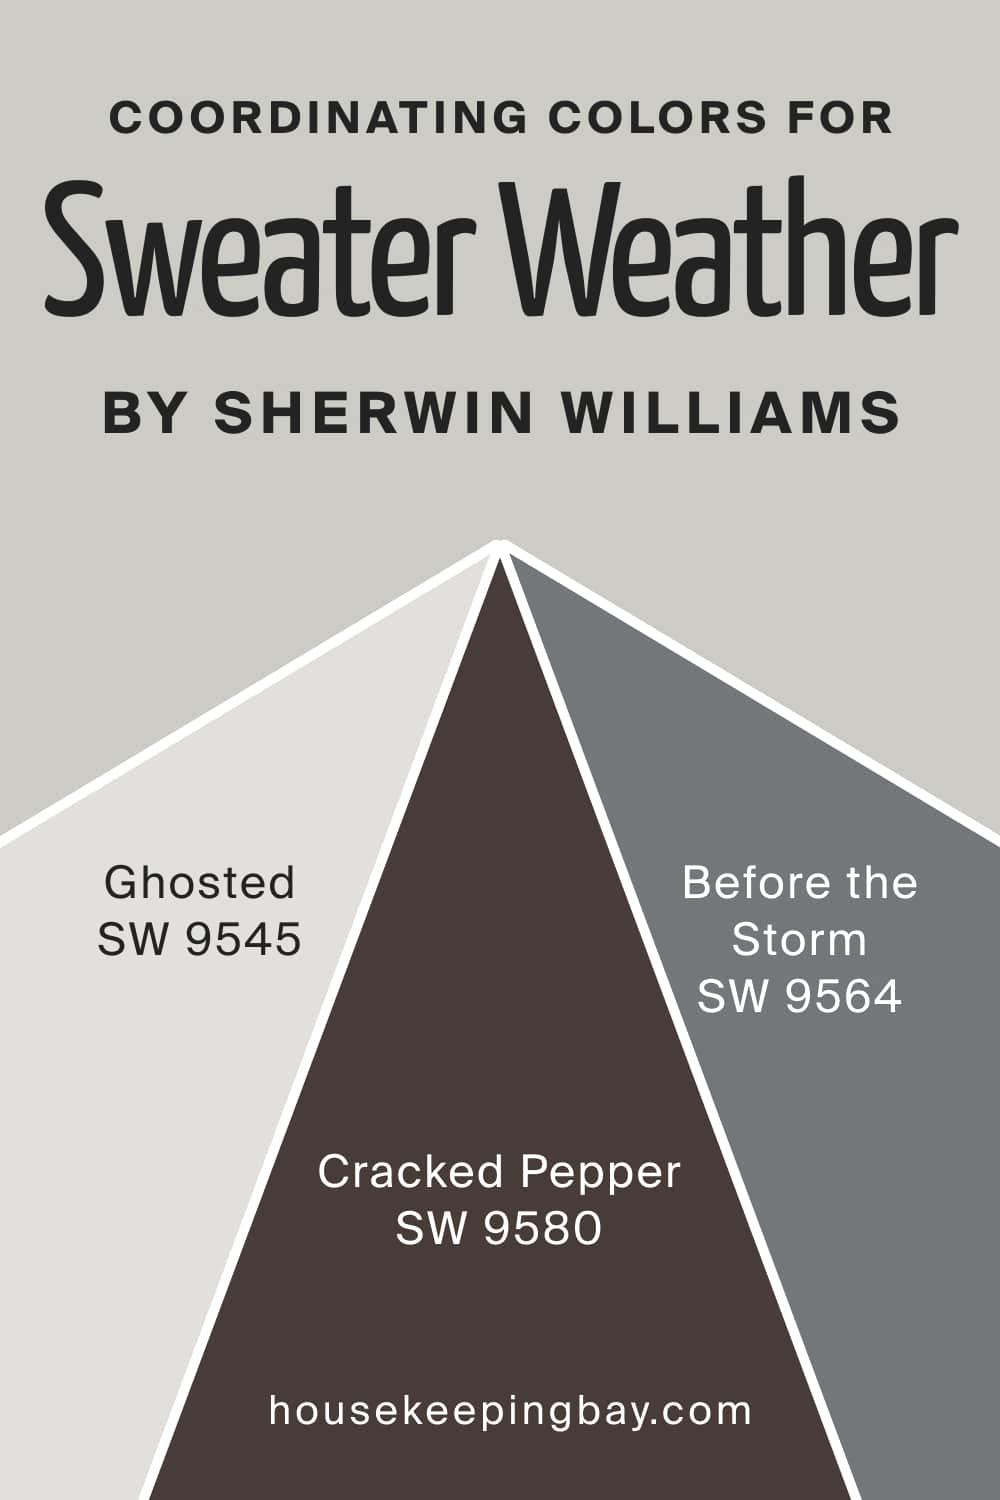 Coordinating Colors for Sweater Weather SW 9548 by Sherwin Williams